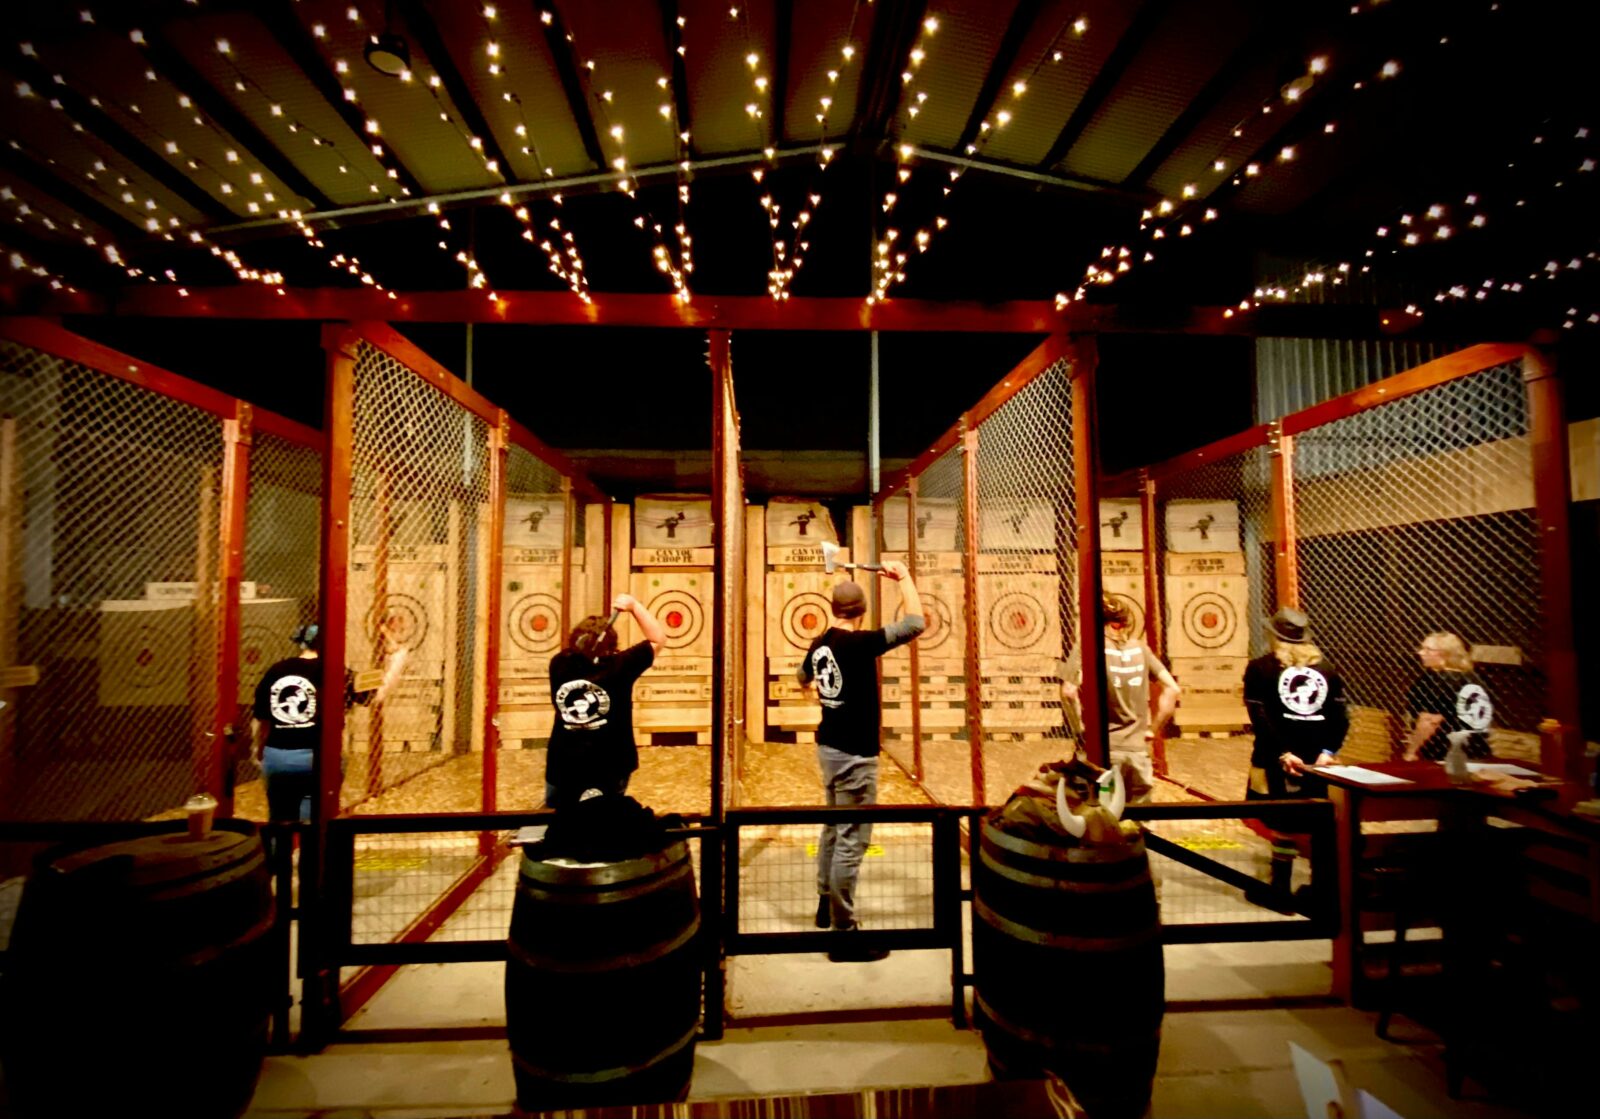 You of our eight axe throwing lanes with people throwing axes